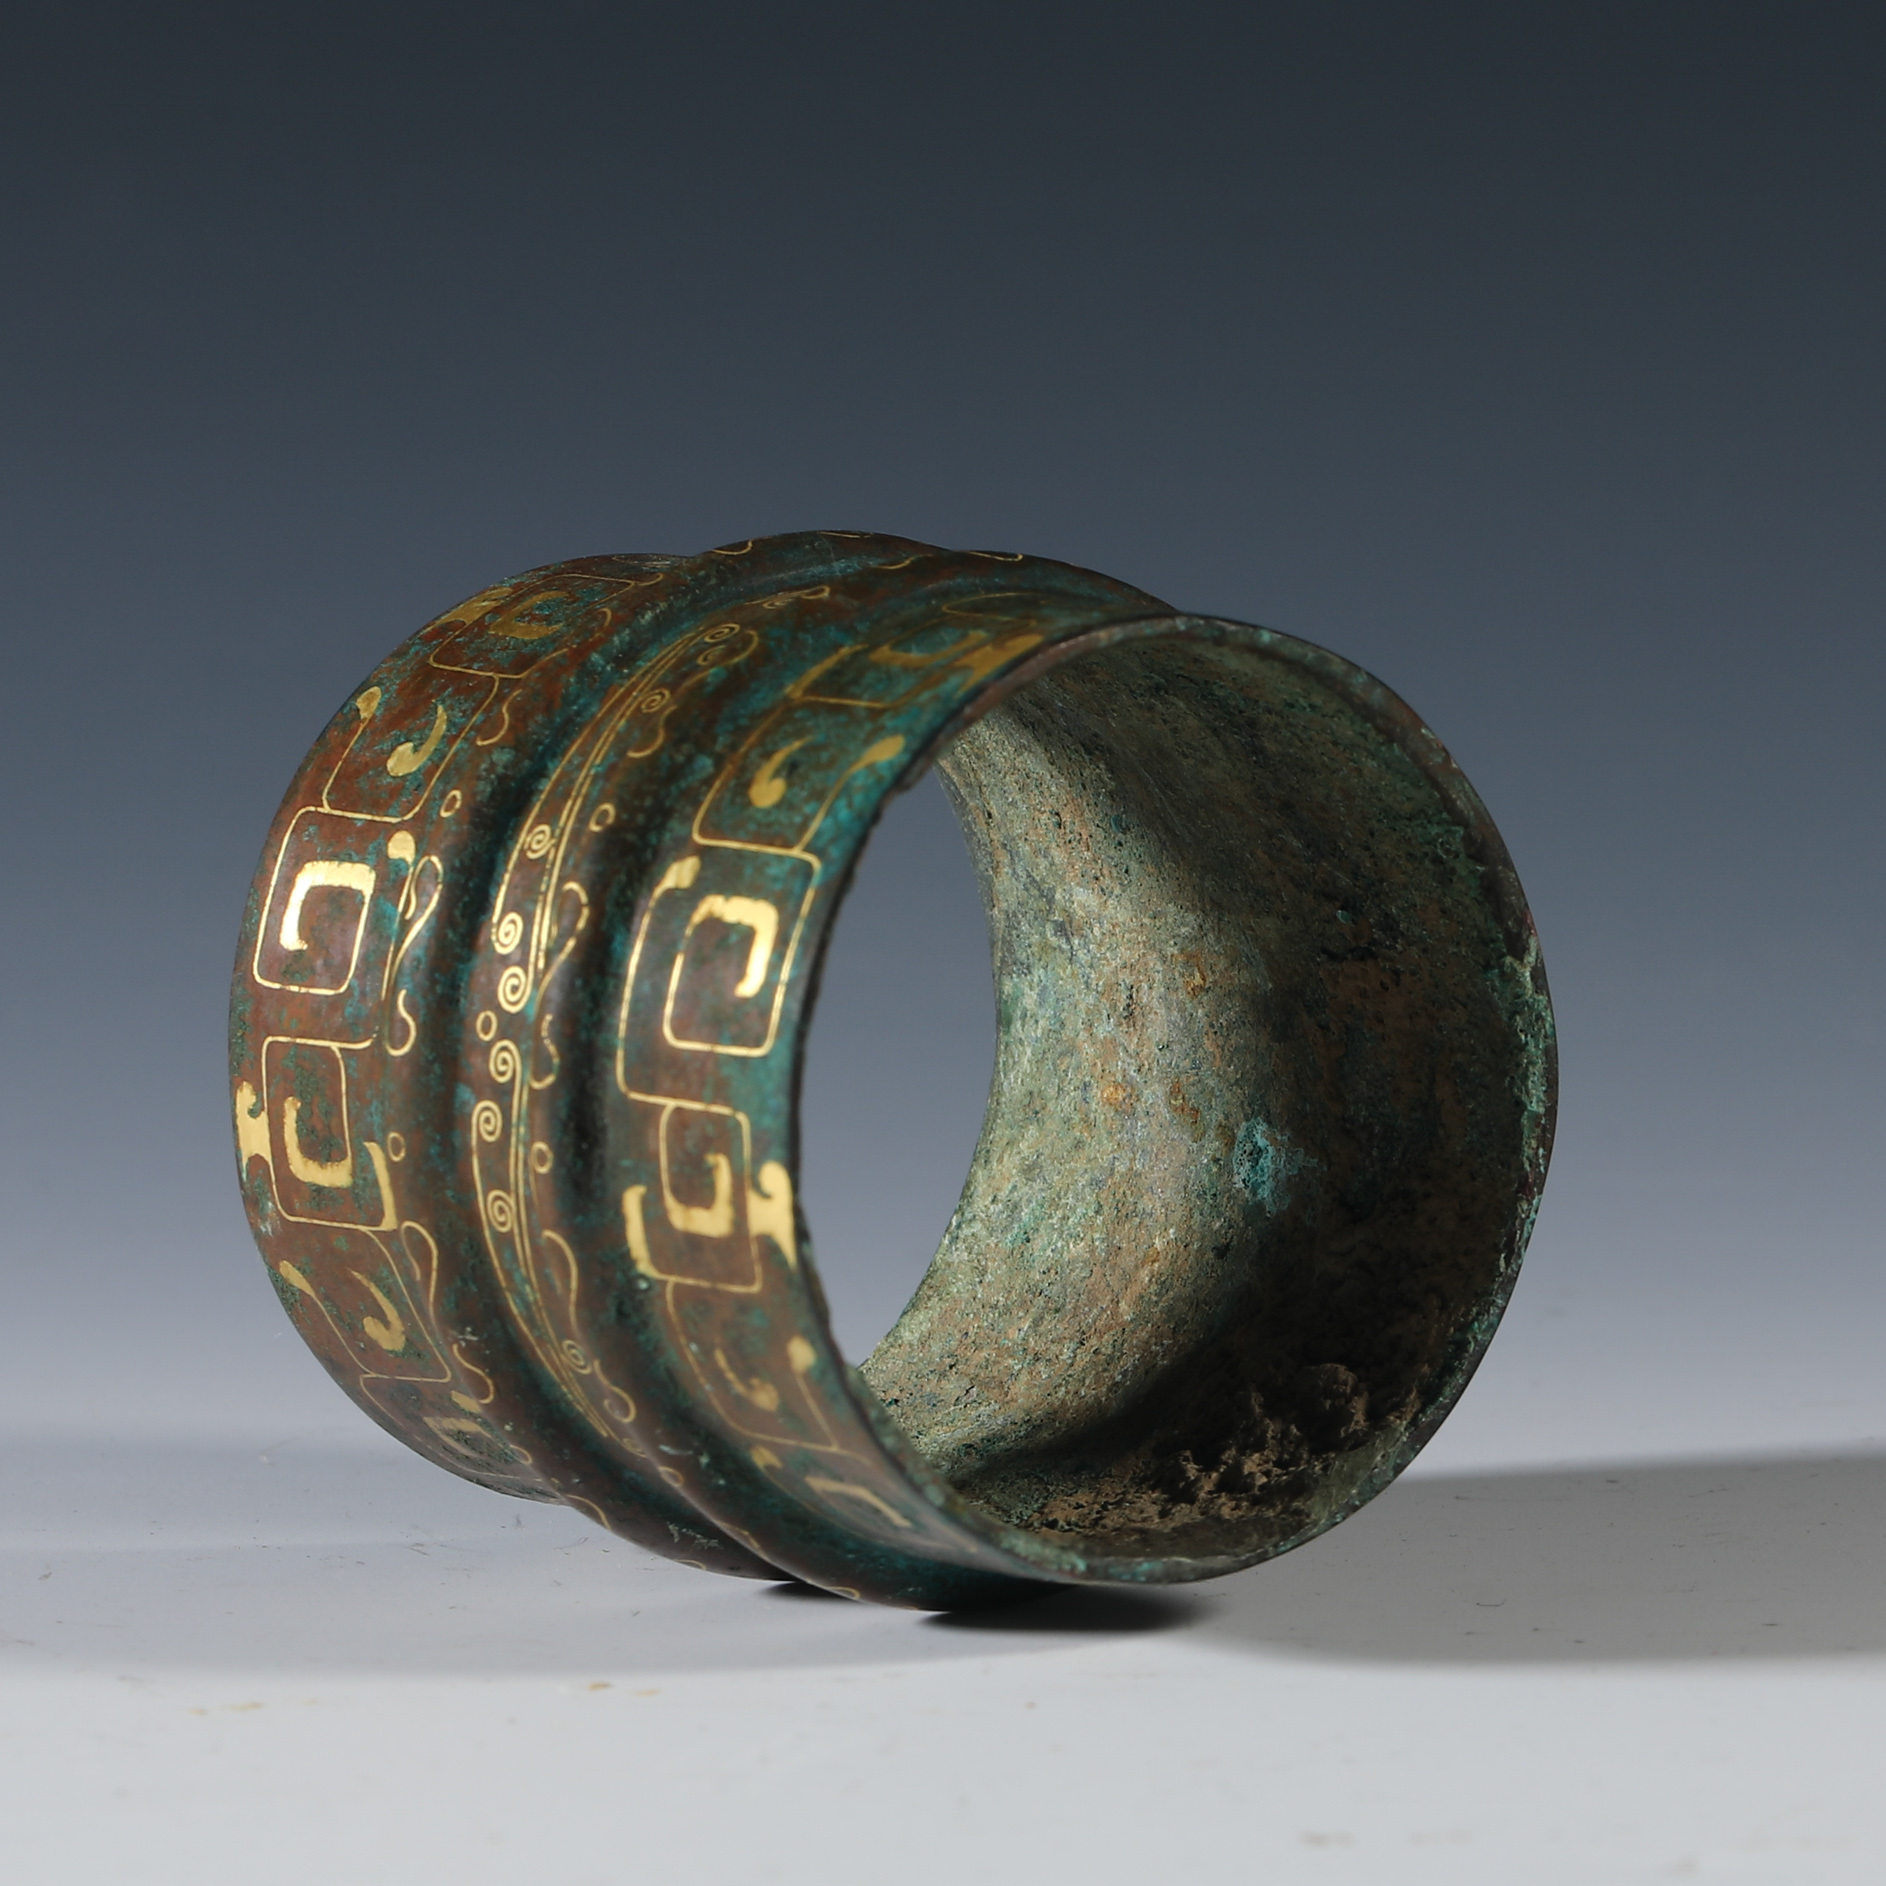 A group of copper and gold components  from the Han dynasty  - Image 5 of 7